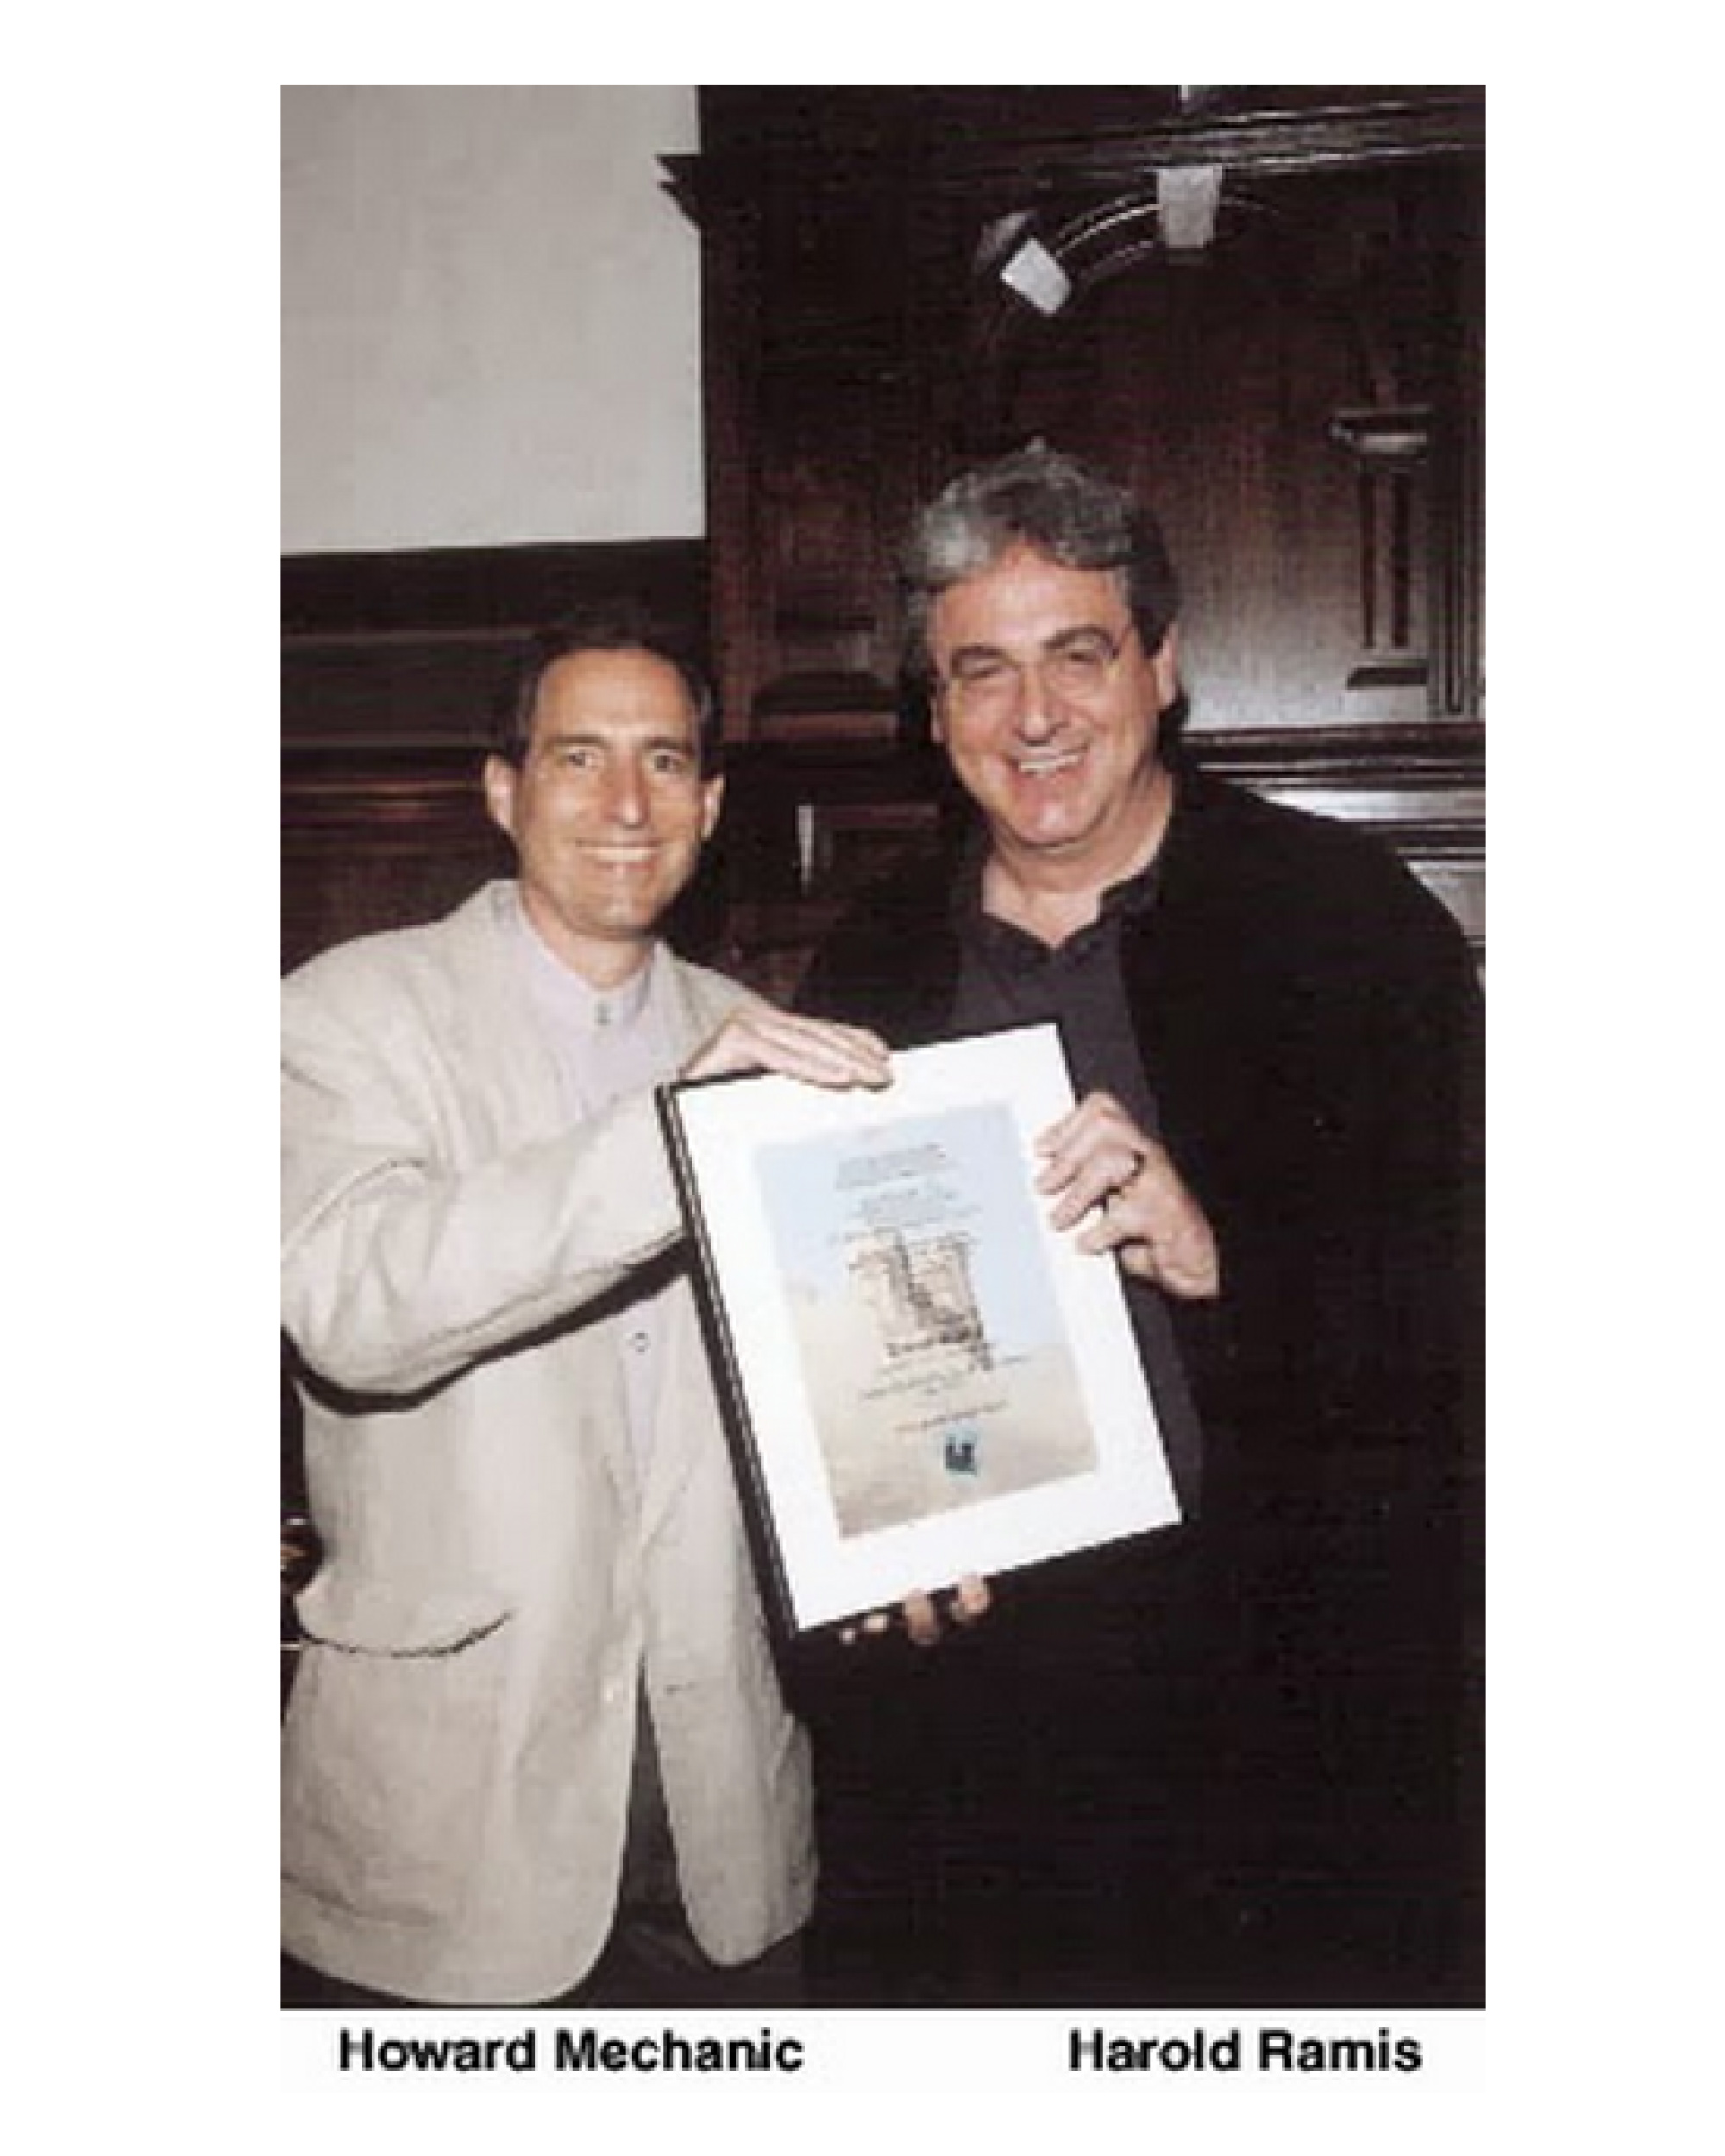 Howard with Harold Ramis, who became a supporter and advocate for his release.